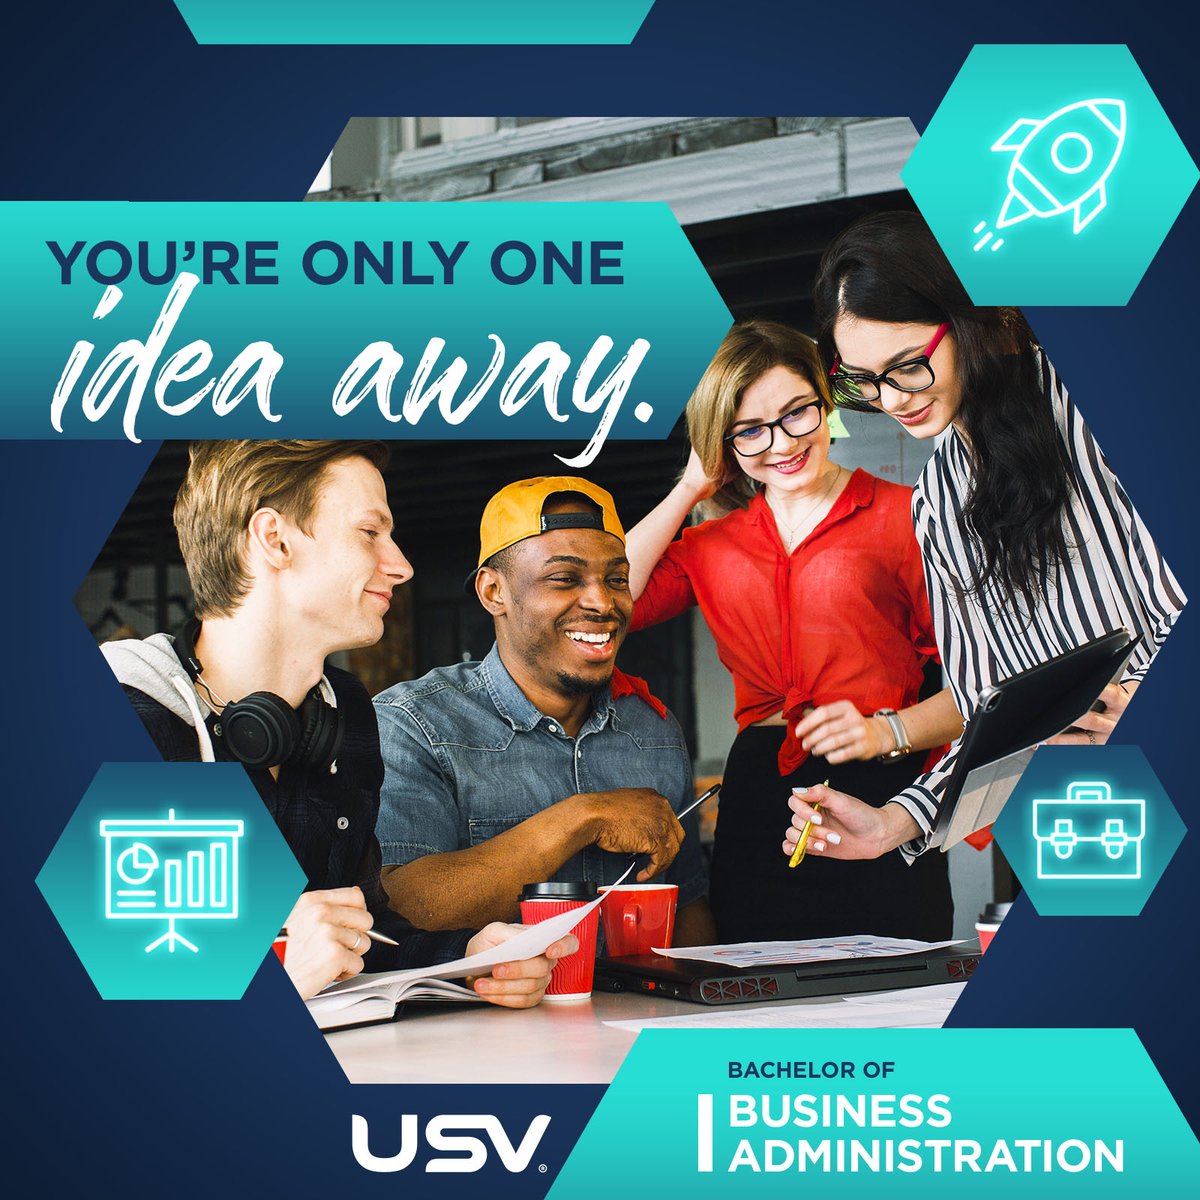 Take a byte outta the future of business with USV's Business Administration program! Our innovative approach to education will allow you to make a difference in the business industry. Learn more here ▶️ bit.ly/431UsJe  #BusinessAdministration #USV #FuturisticCareers